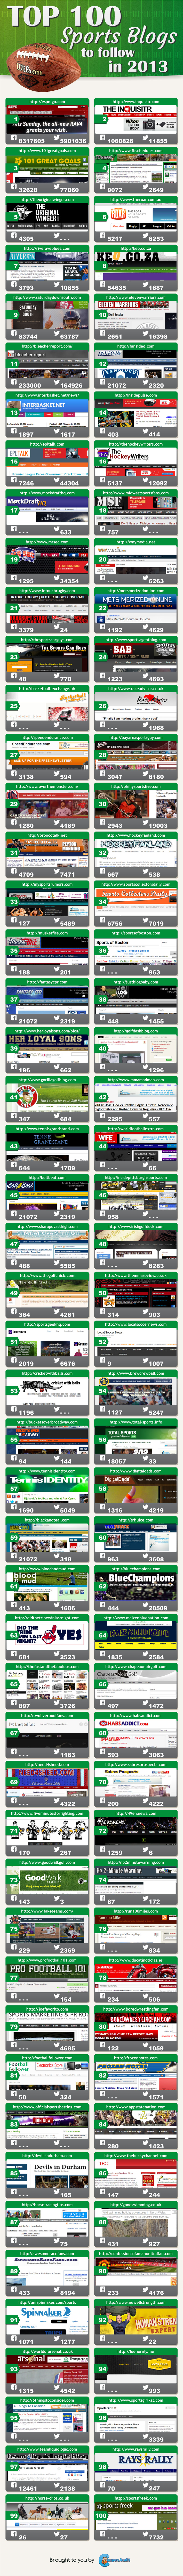 Top 100 Sports Blogs To Follow In 2013 [Infographic]